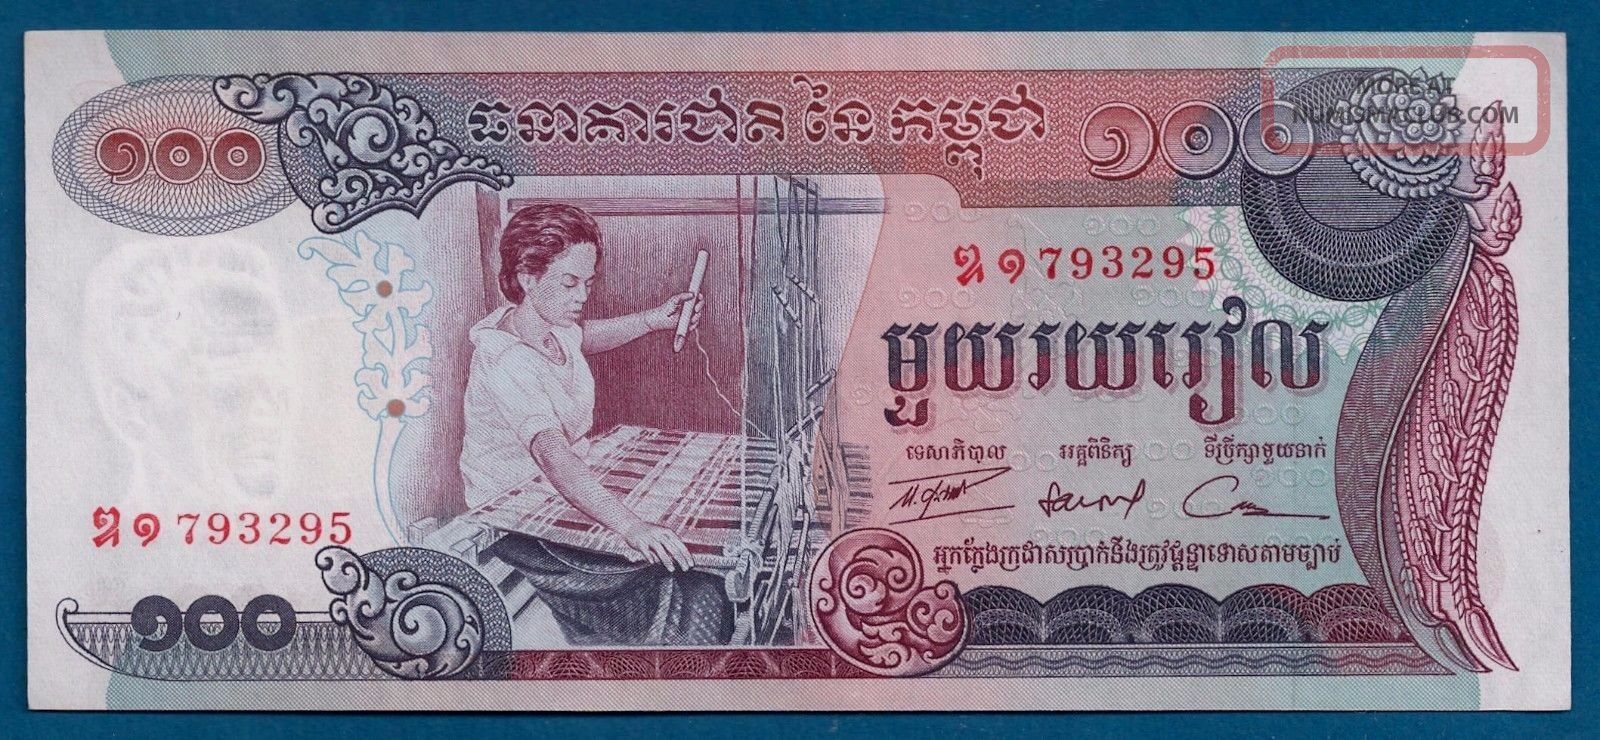 Cambodia Khmer Republic 100 Riels Nd - 1973 P - 15 Unc Angkor Wat On Back Asia photo